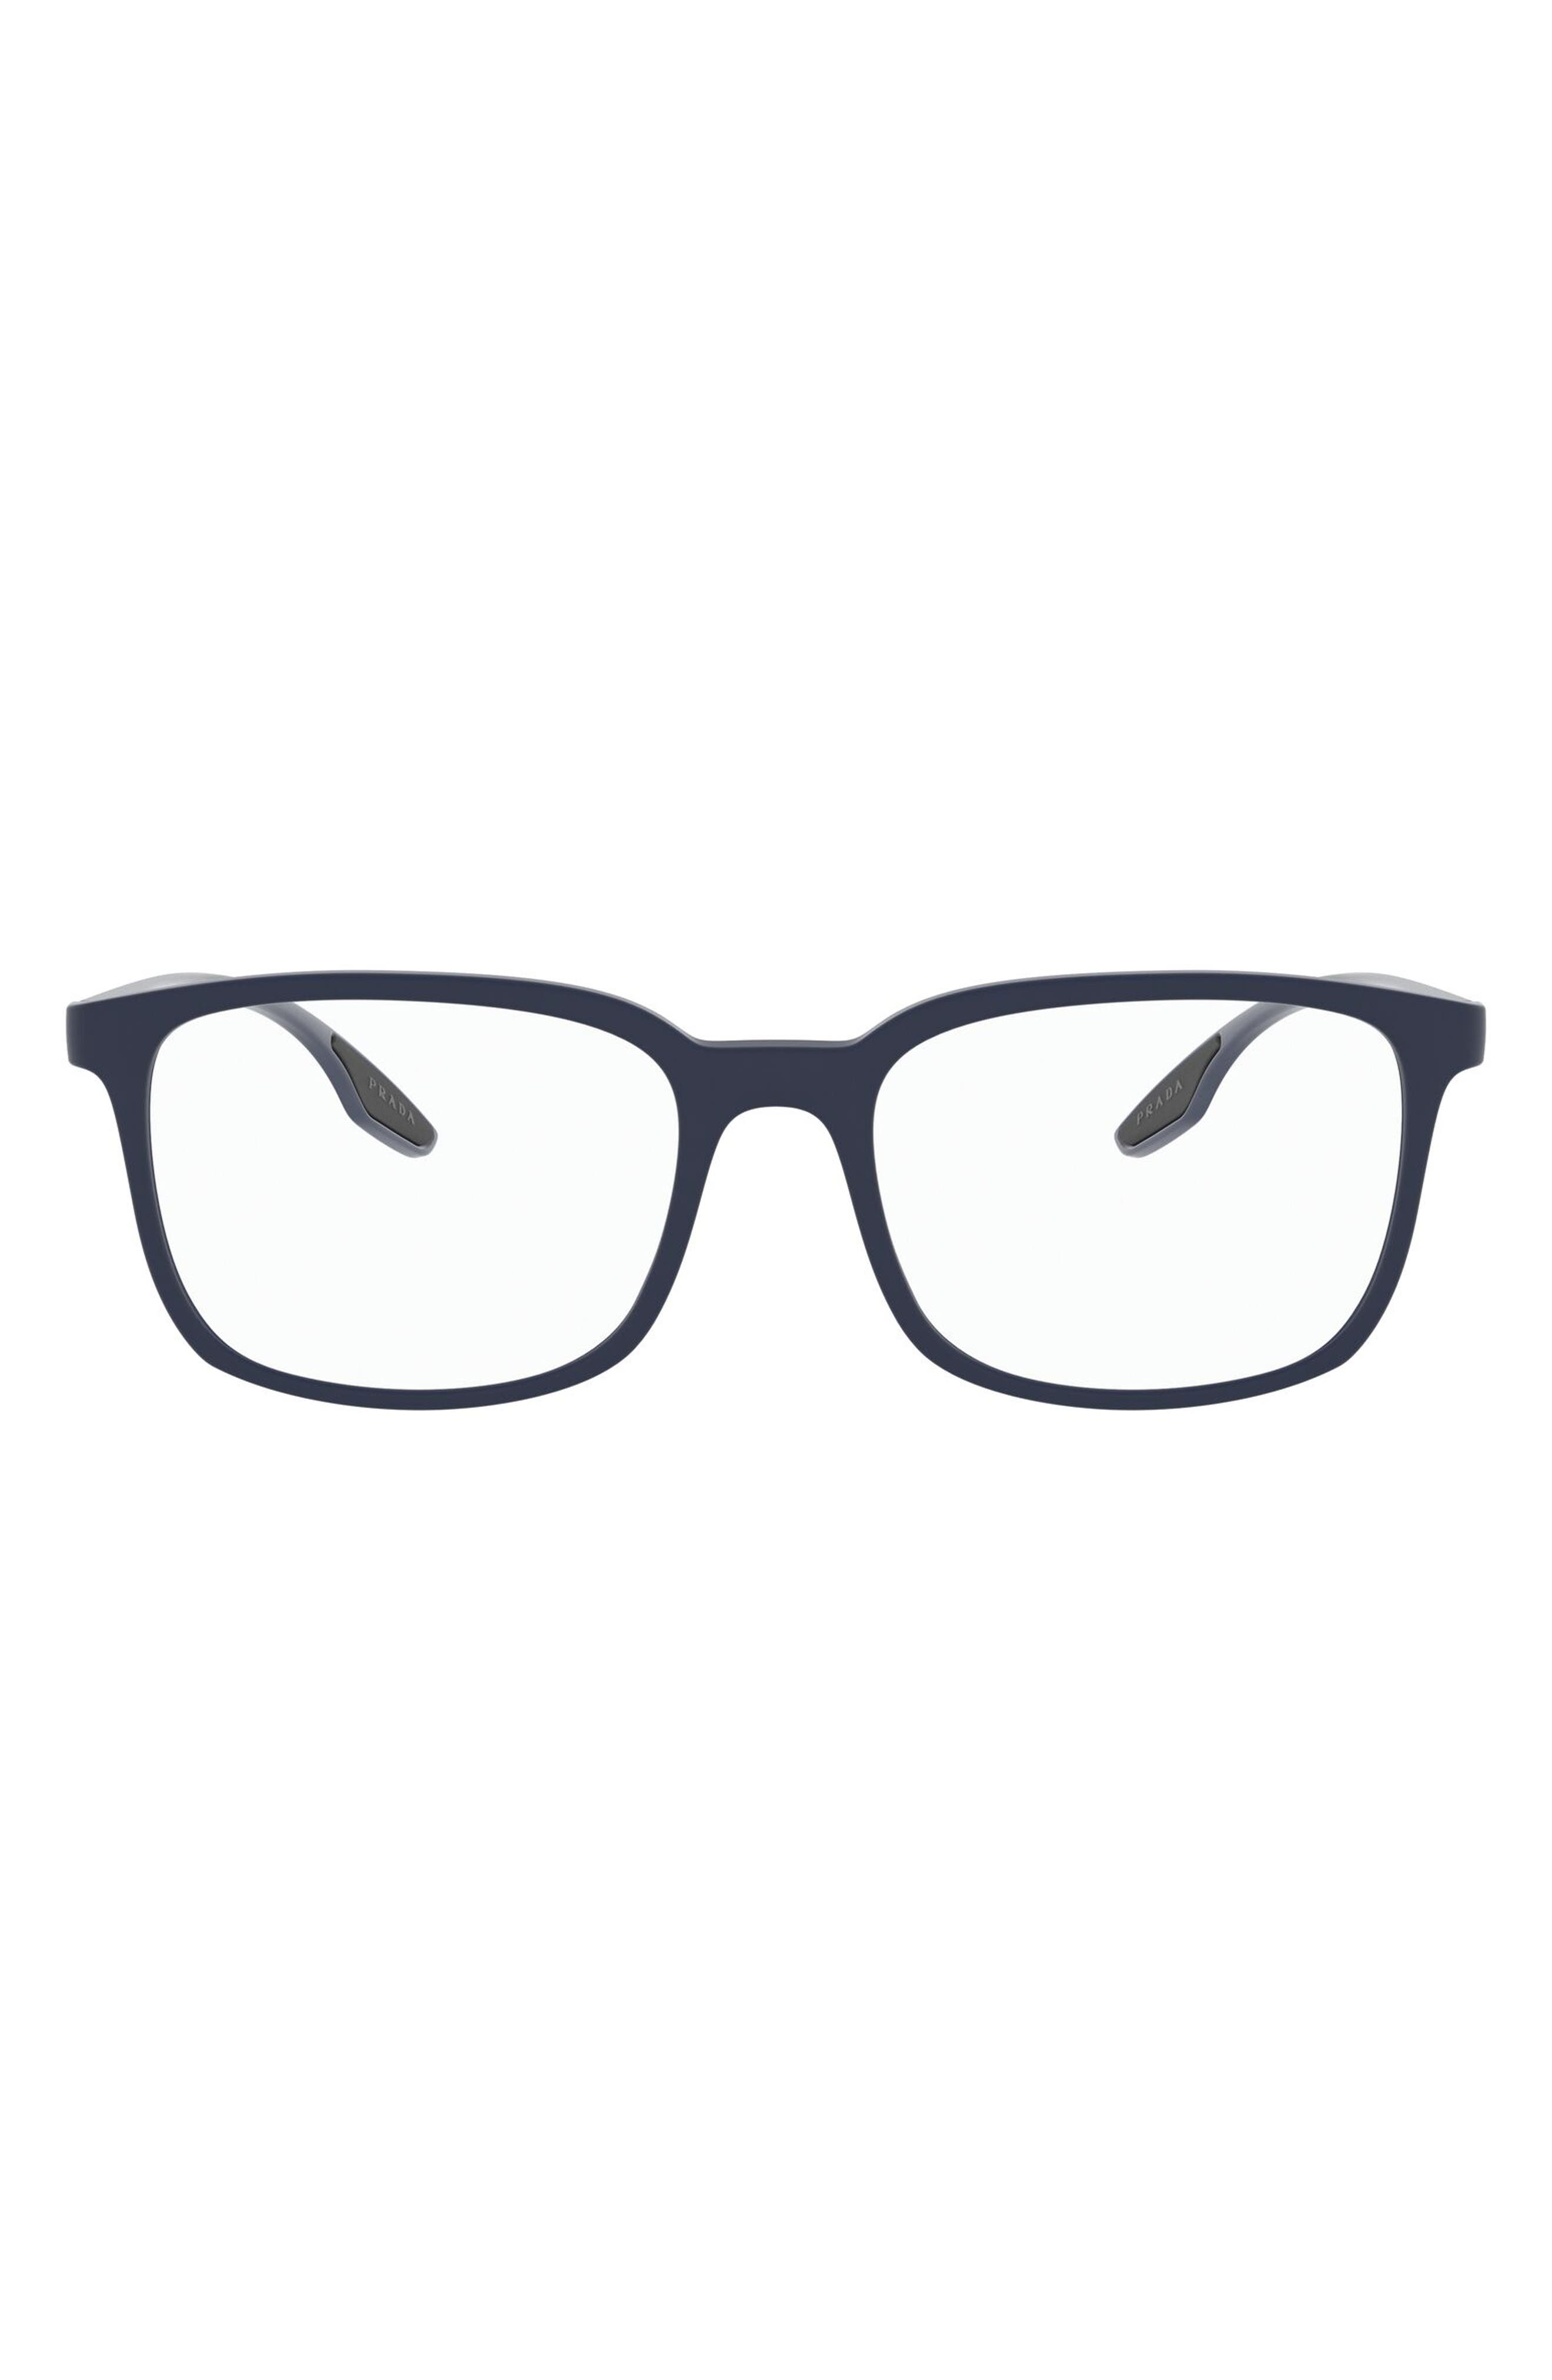 Prada Pillow 55mm Optical Glasses in Blue Rubber at Nordstrom